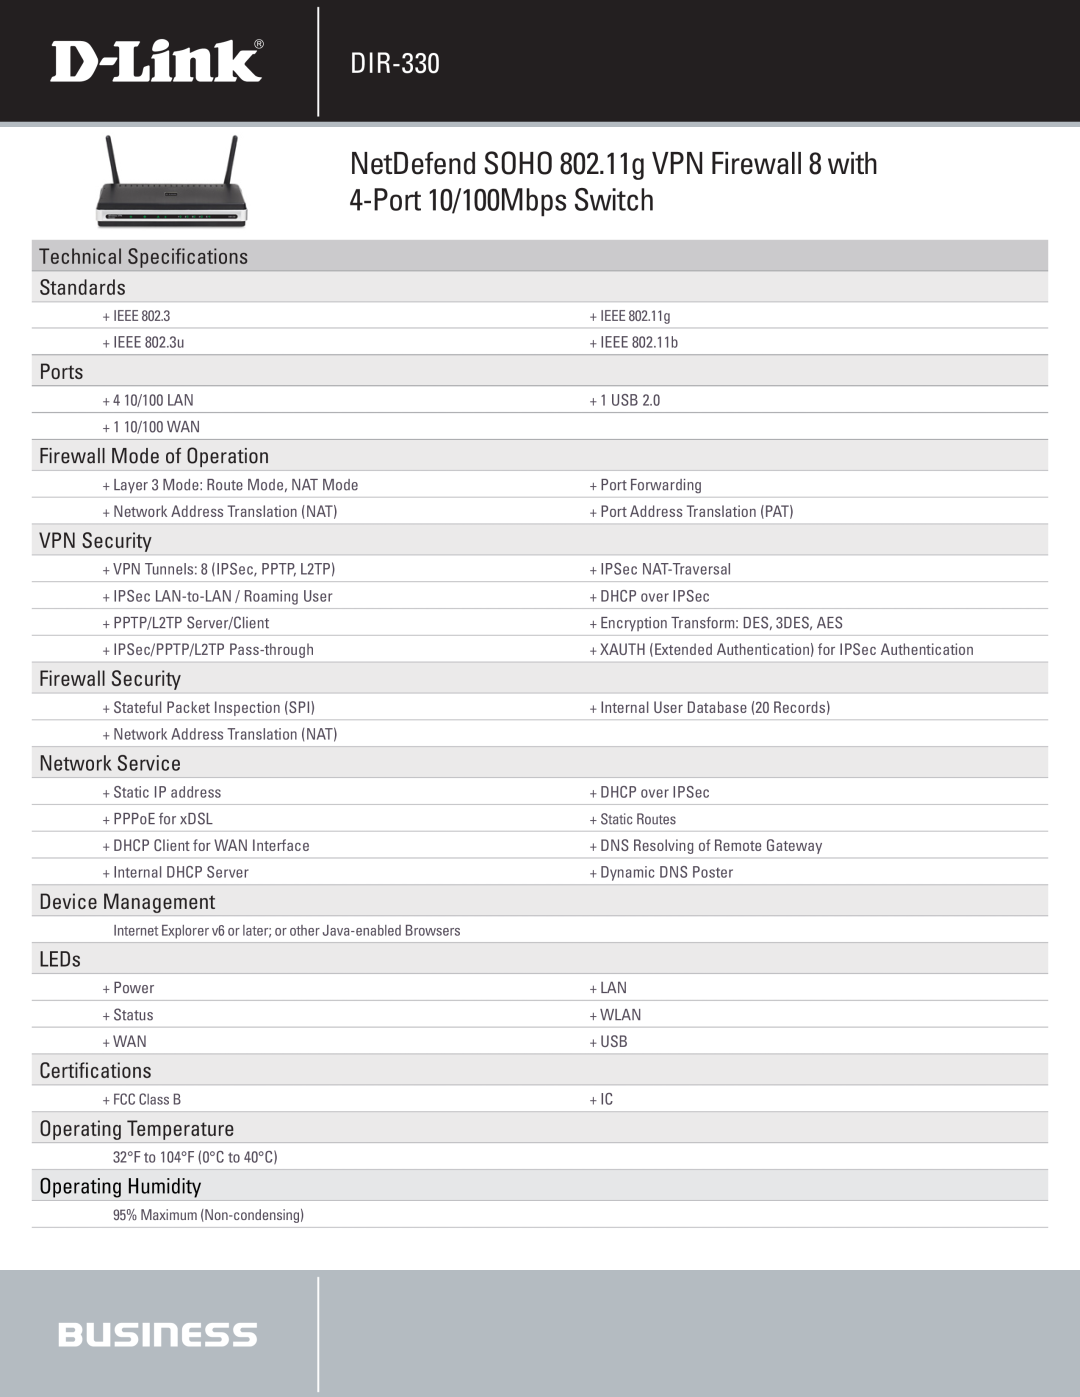 D-Link DIR-330 Technical Specifications Standards, NetDefend SOHO 802.11g VPN Firewall 8 with 4-Port 10/100Mbps Switch 